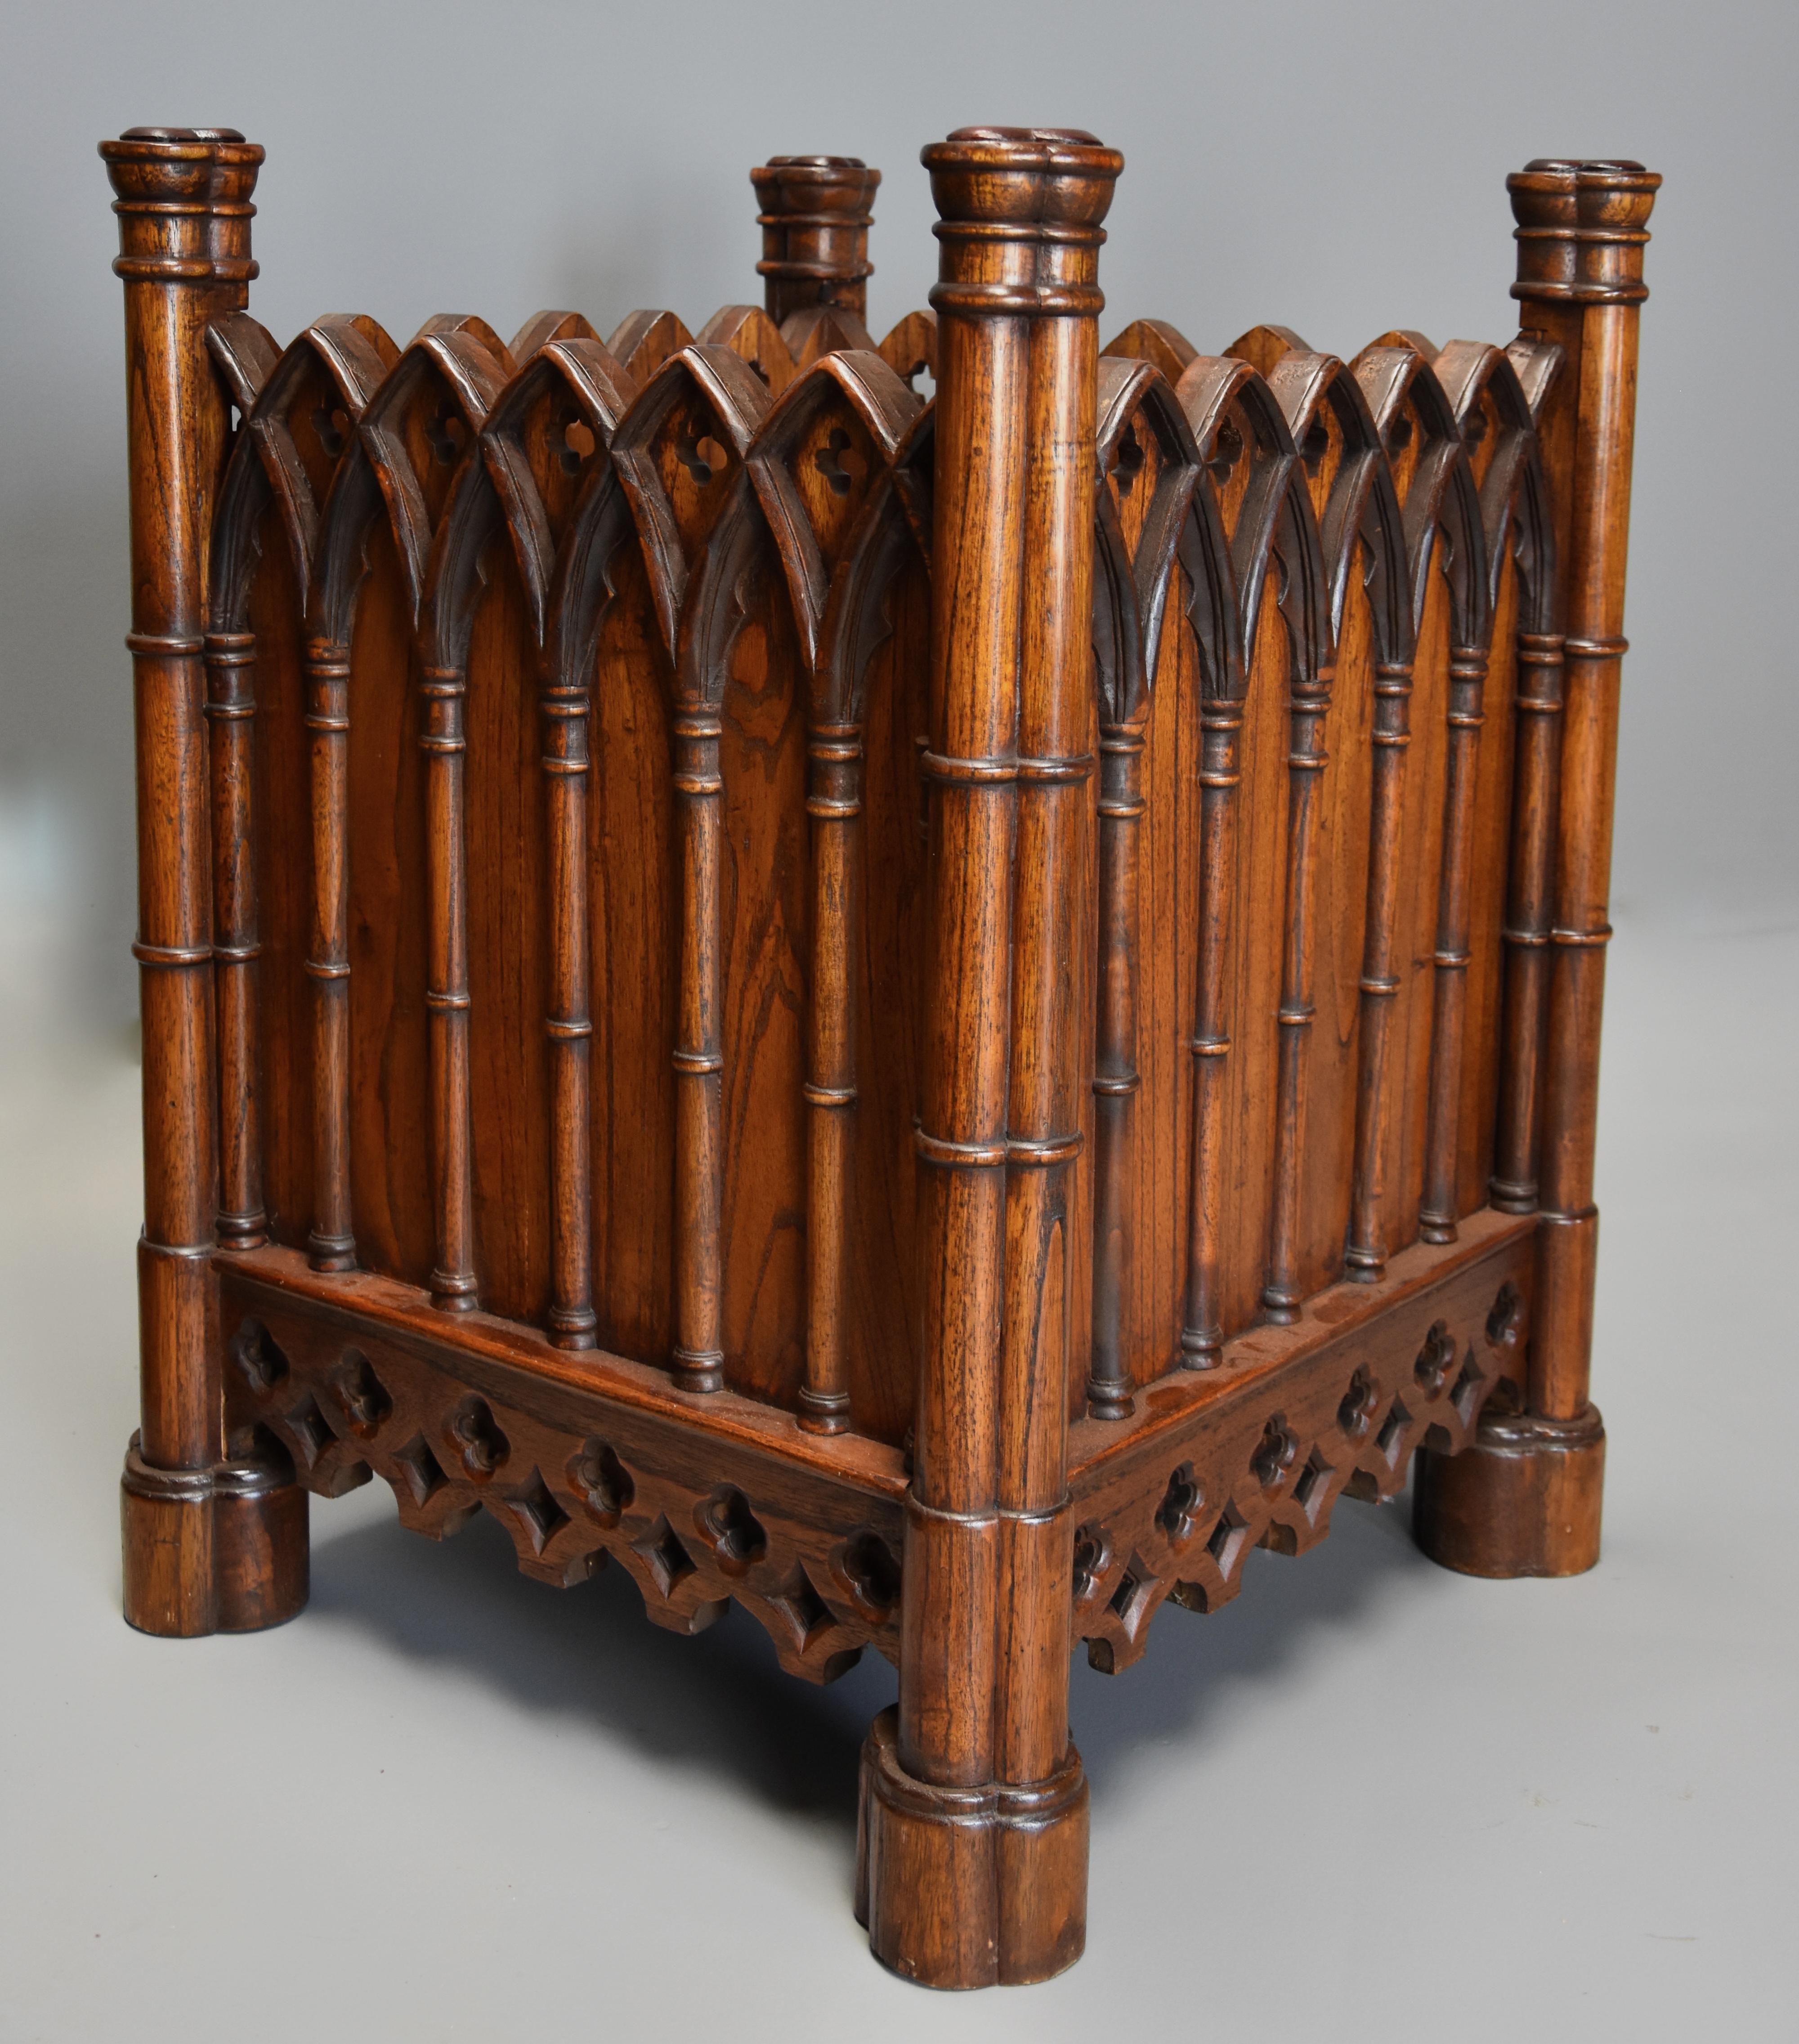 A highly decorative elm Gothic style planter.

This planter consists of four Gothic style corner supports with trefoil decoration to the top with Gothic style arched gallery with pierced quatrefoil design. 
 
This leads down to a frieze below